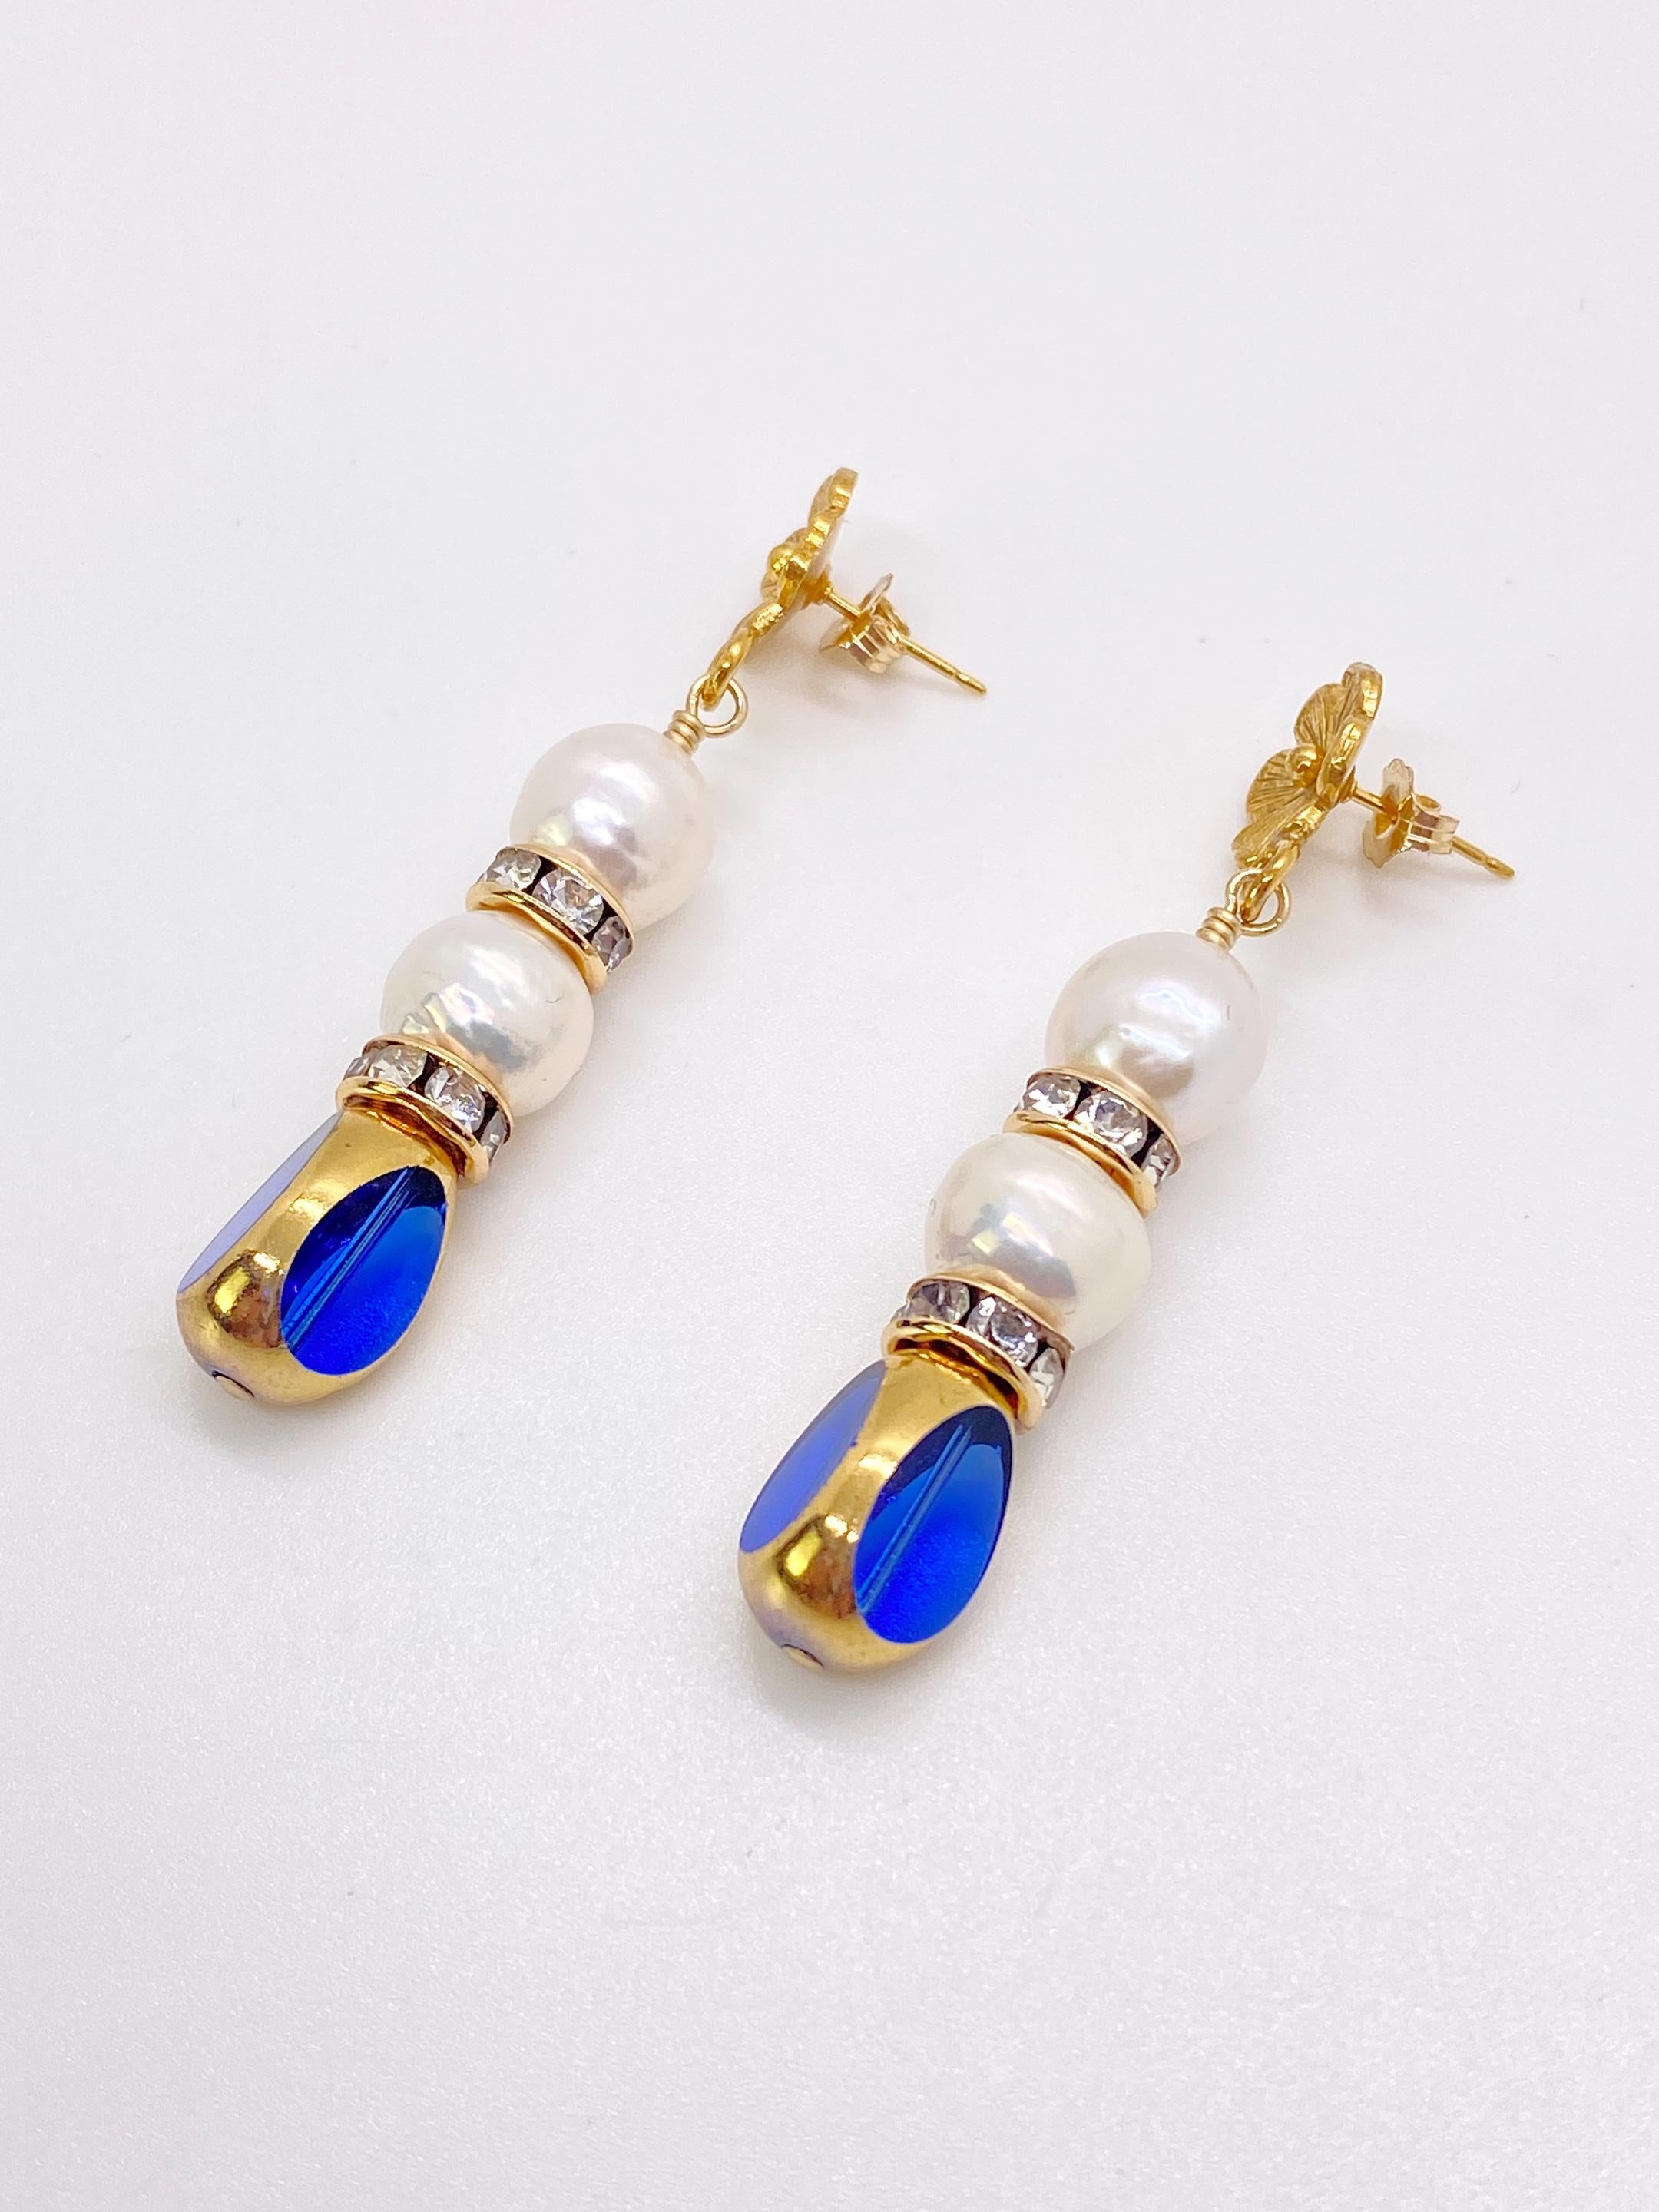 This is for a pair of earrings. Blue transparent vintage German glass beads edged with 24K gold are complimented with freshwater pearls. The earrings are finished with 24K gold plated floral earring post and 14K gold filled rhinestones spacers.

The